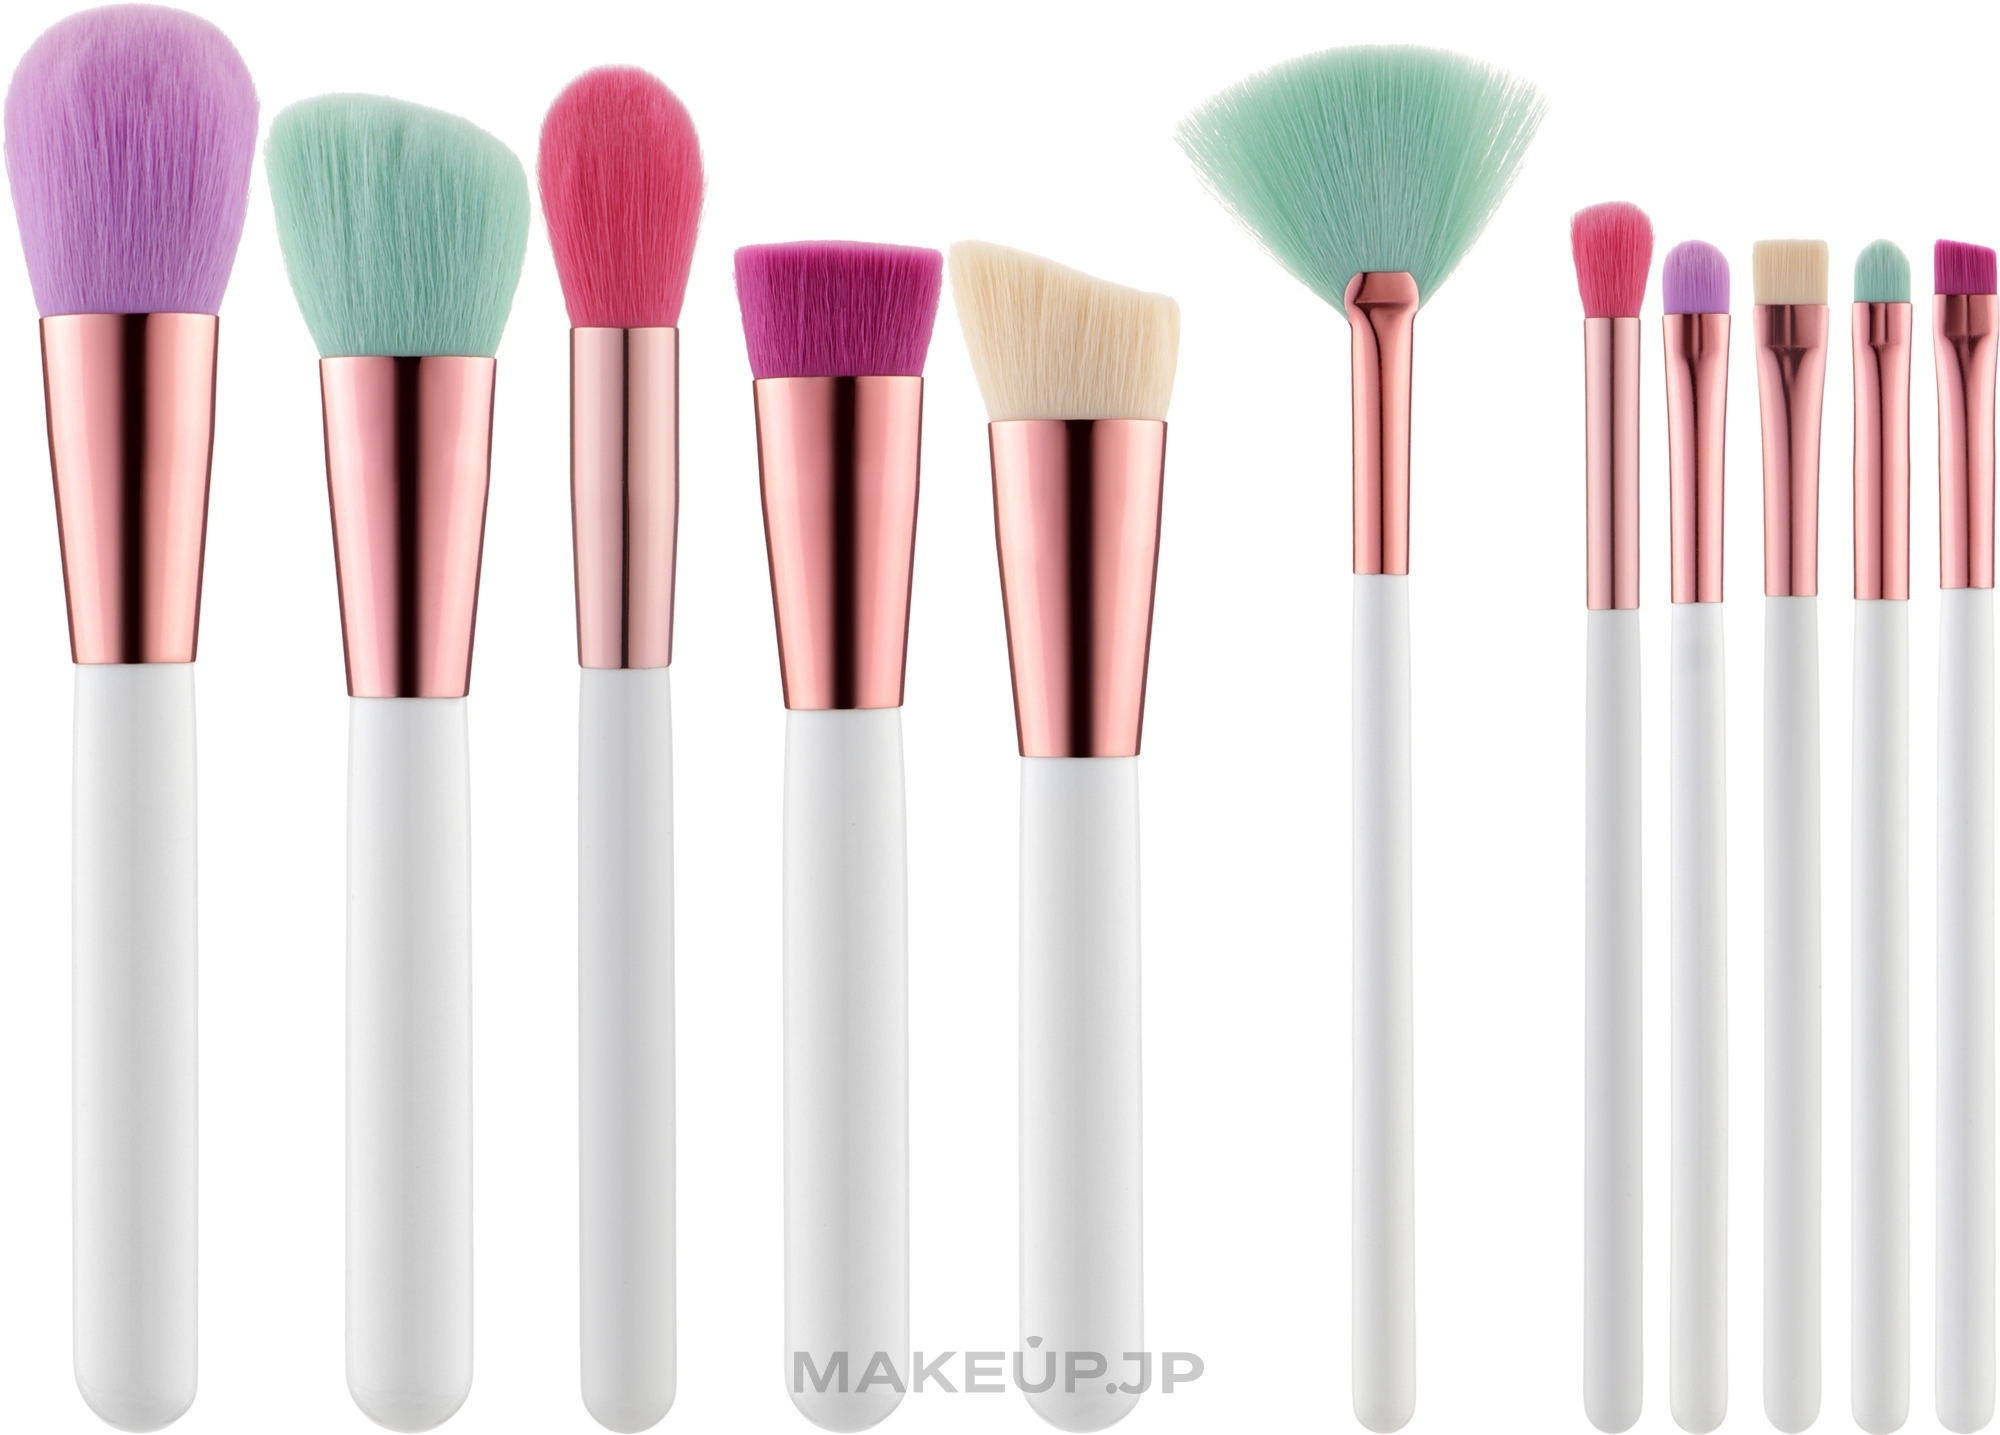 Makeup Brush Set with Case, 11 pcs - Tools For Beauty MiMo Multicolor Set — photo 11 szt.